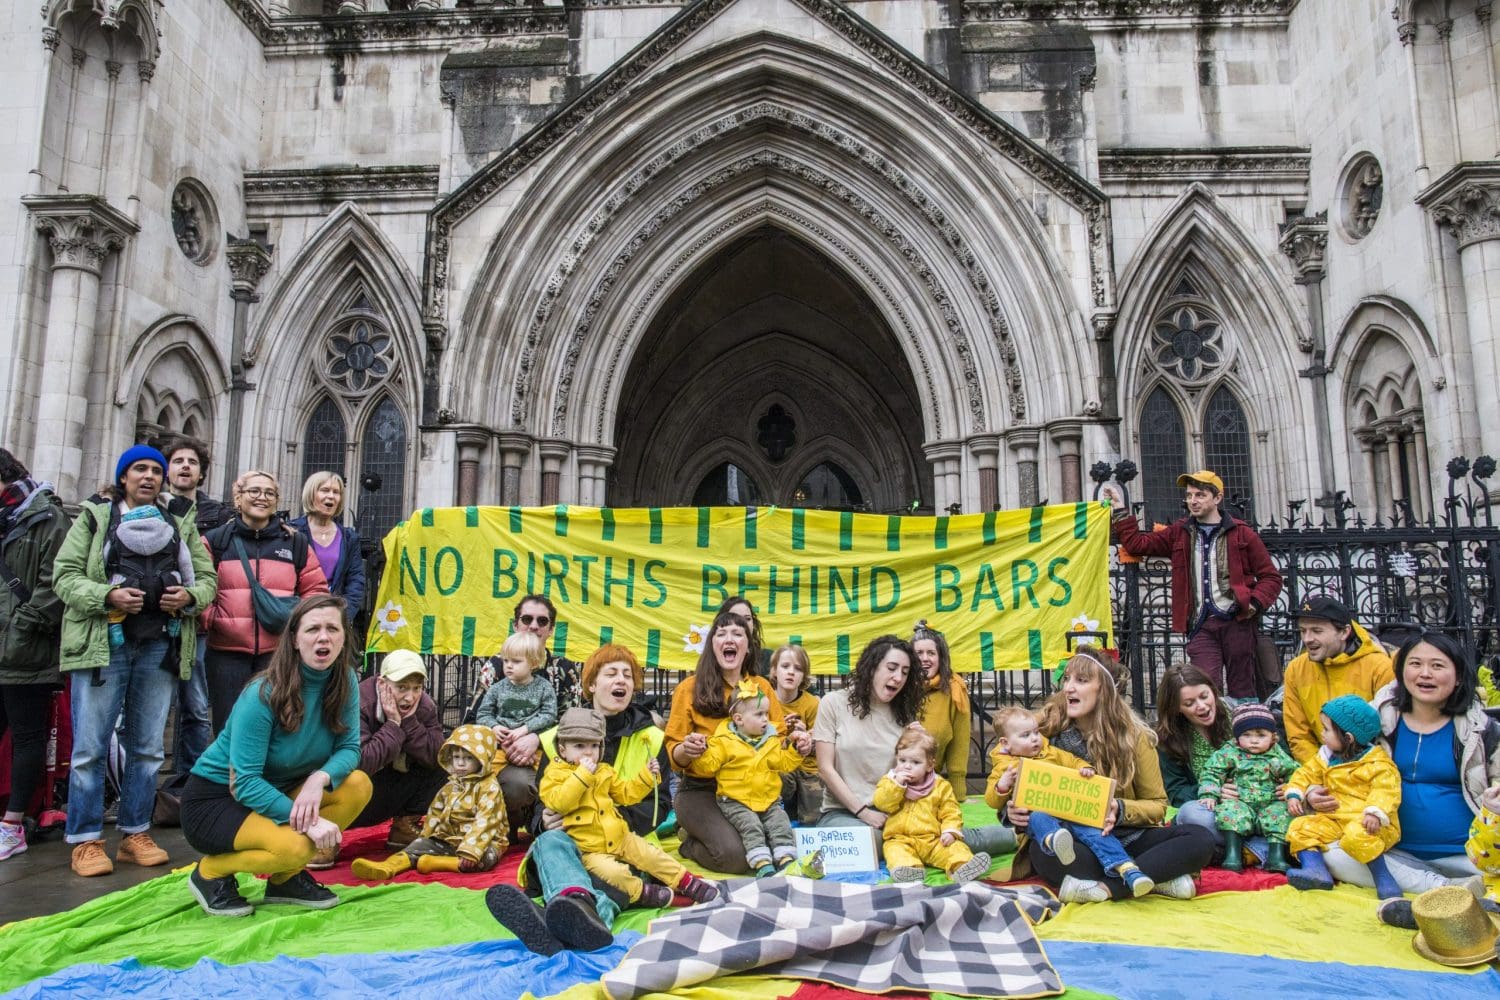 Babies, children and their parents rallied outside the Royal Courts of Justice in London to demand an end to the imprisonment of pregnant women, London, UK Saturday, March 18, 2023 The protest was organised by No Births Behind Bars and Level Up.